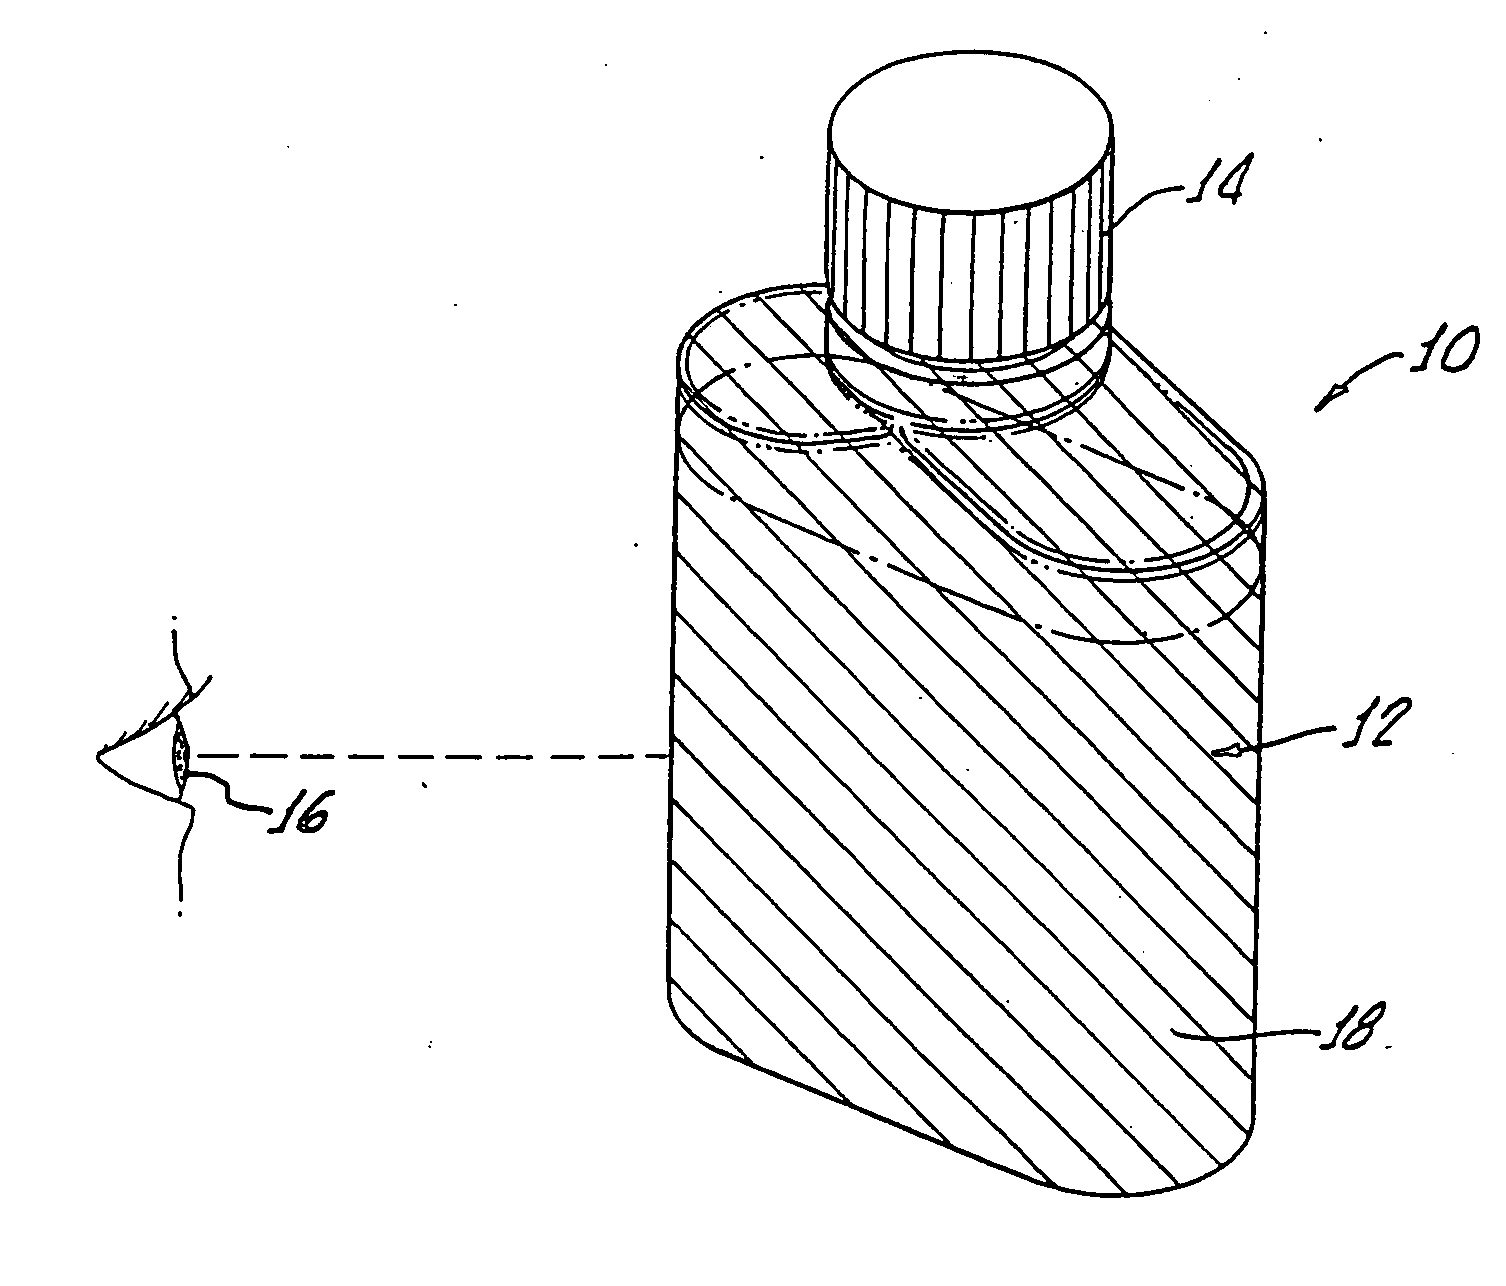 Container method for product integrity and identification